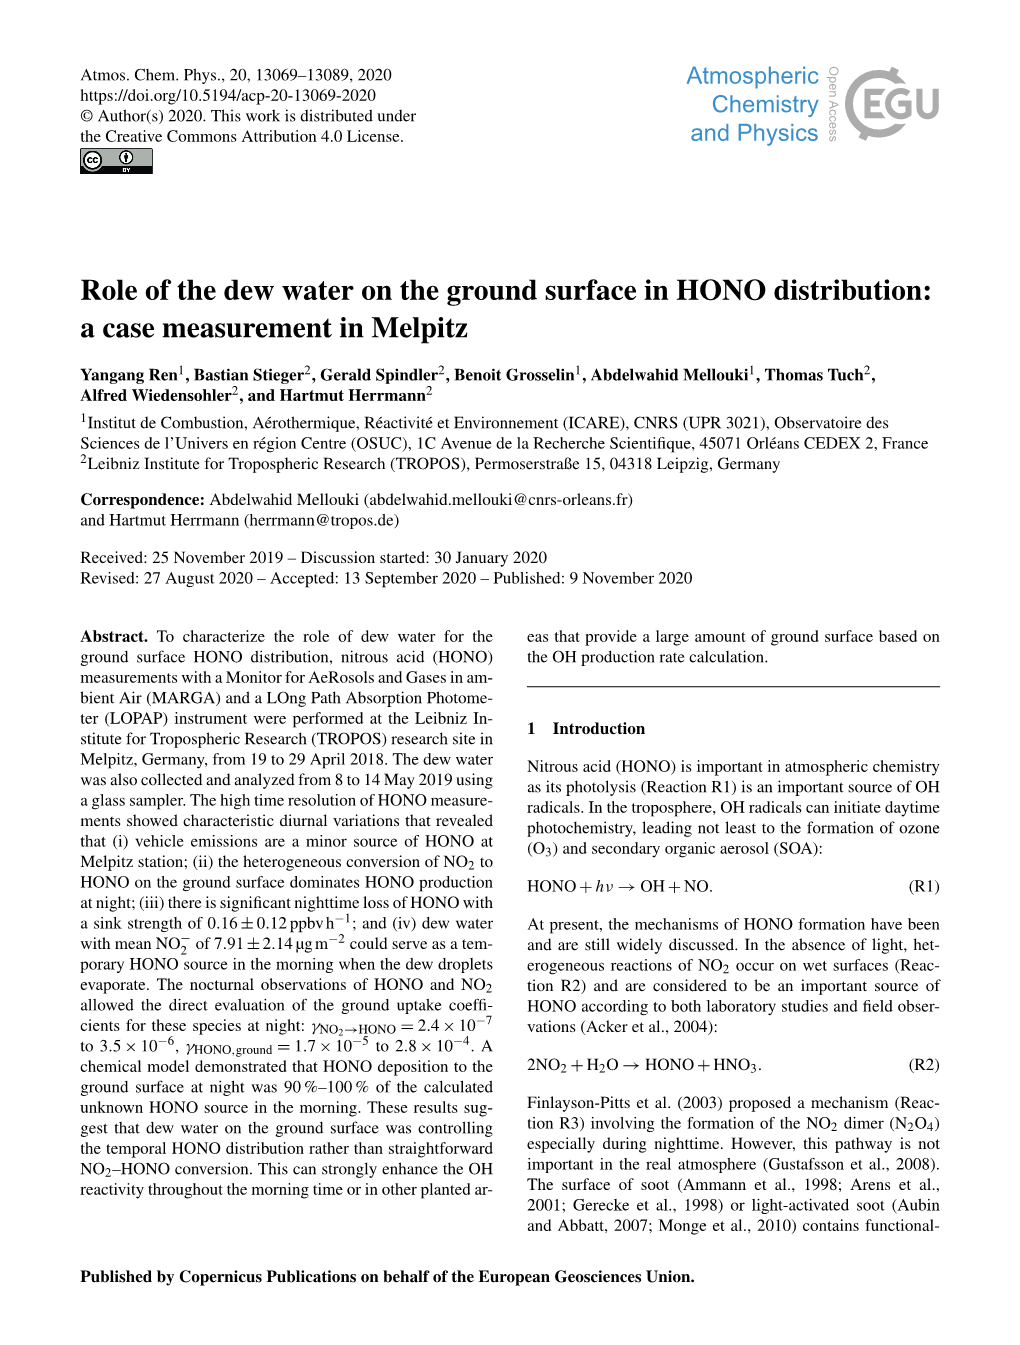 Role of the Dew Water on the Ground Surface in HONO Distribution: a Case Measurement in Melpitz